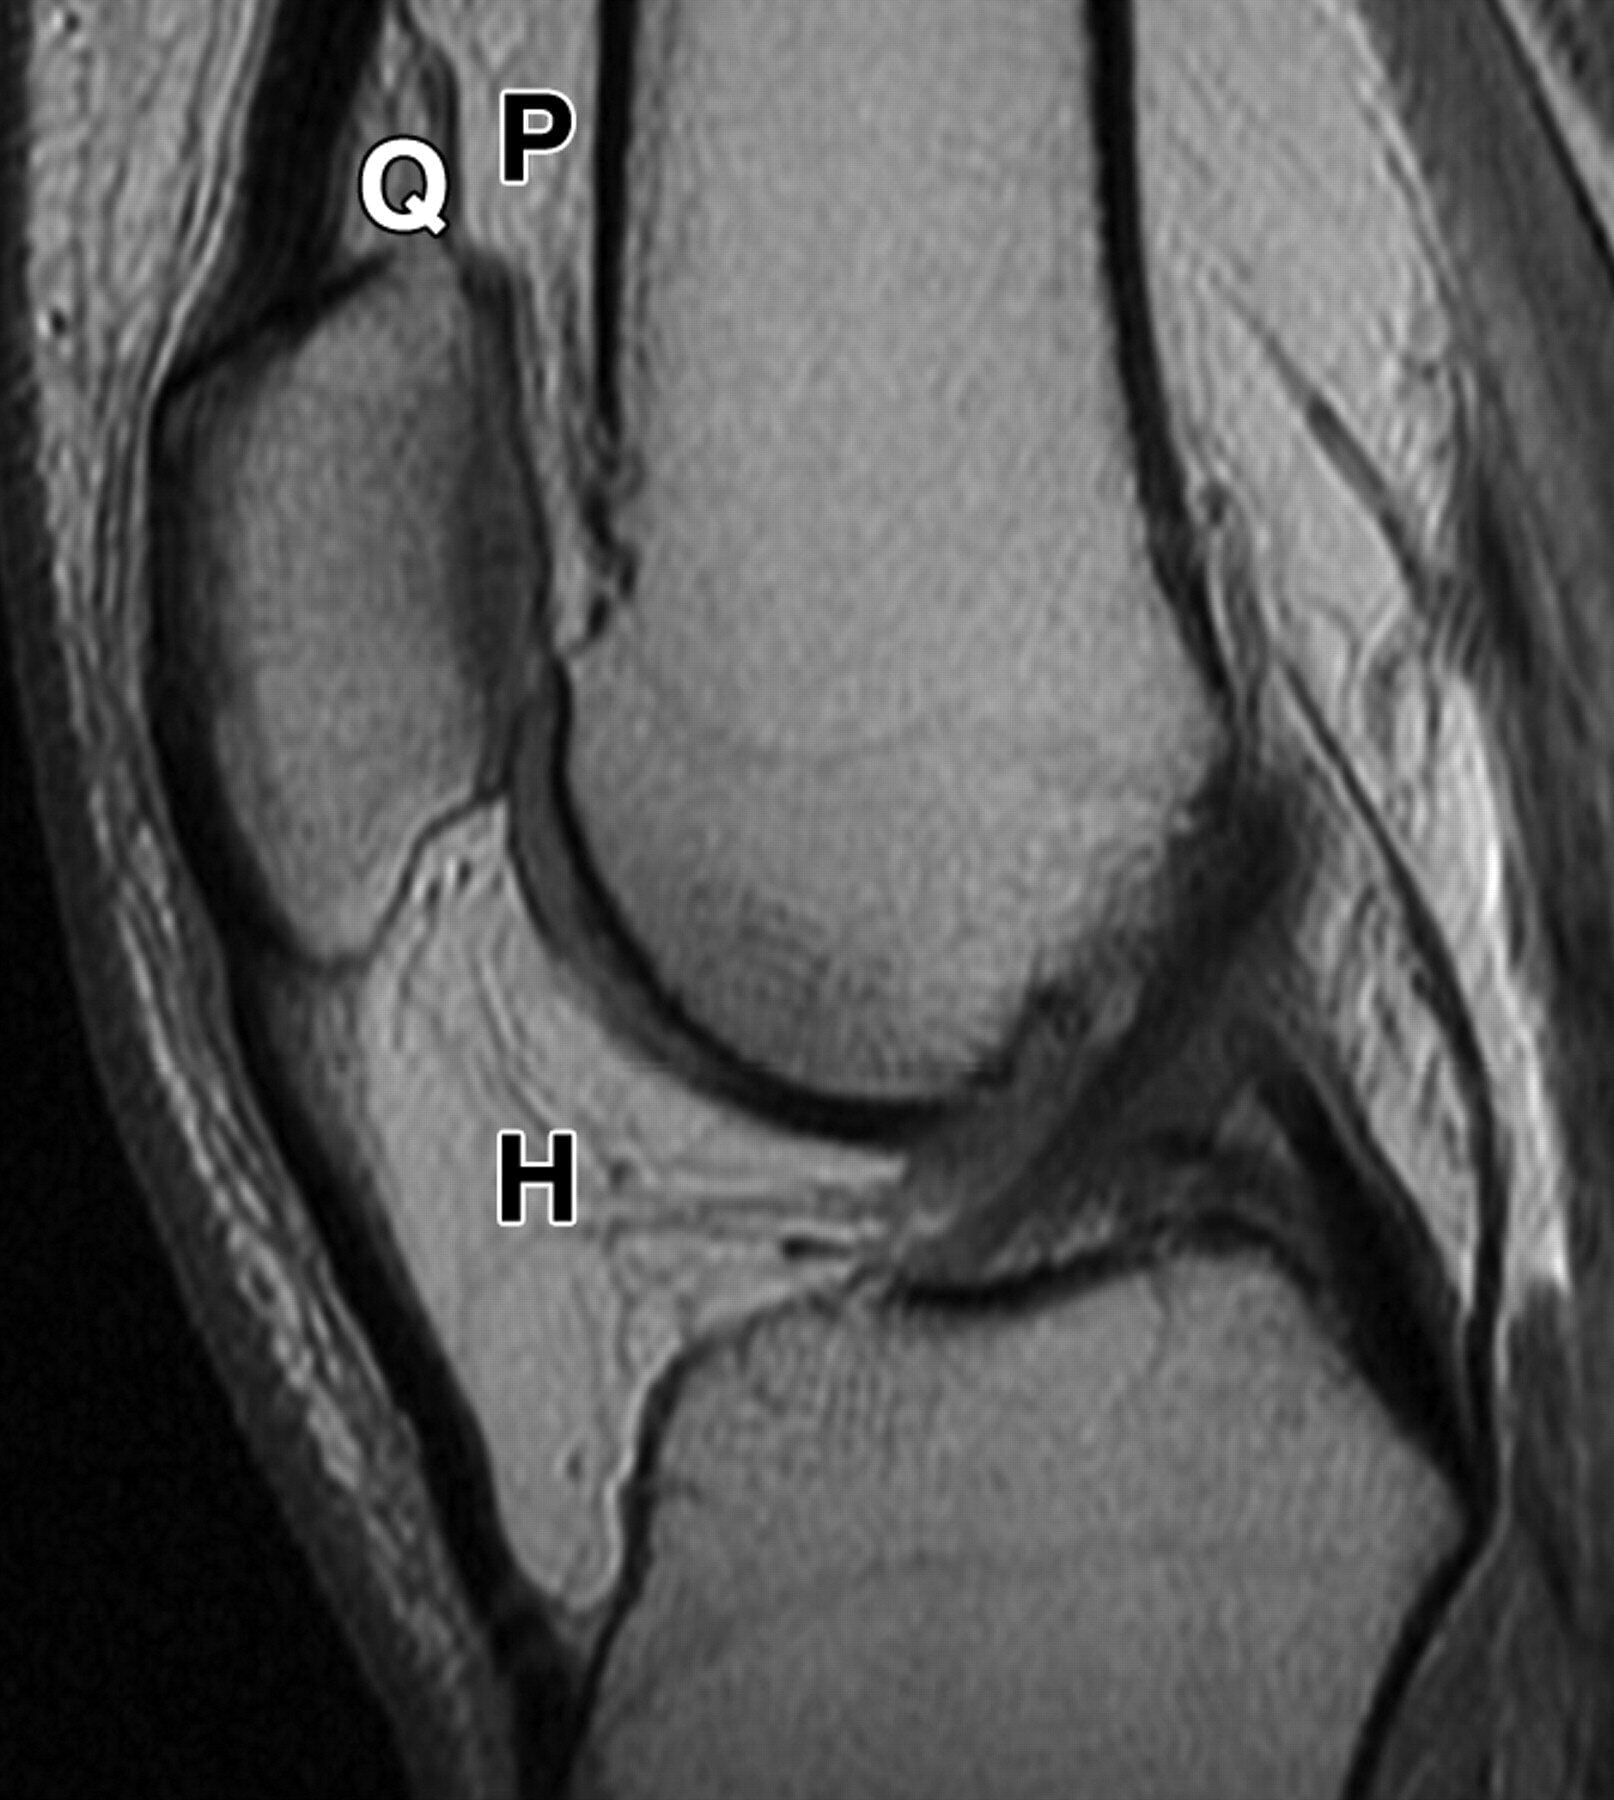 37-year-old man with knee pain and small joint effusion but normal fat pads. Midsagittal intermediate-weighted MR image shows normal quadriceps (Q), prefemoral fat pad (P), and Hoffa’s fat pad (H). Source: American Roentgen Ray Society